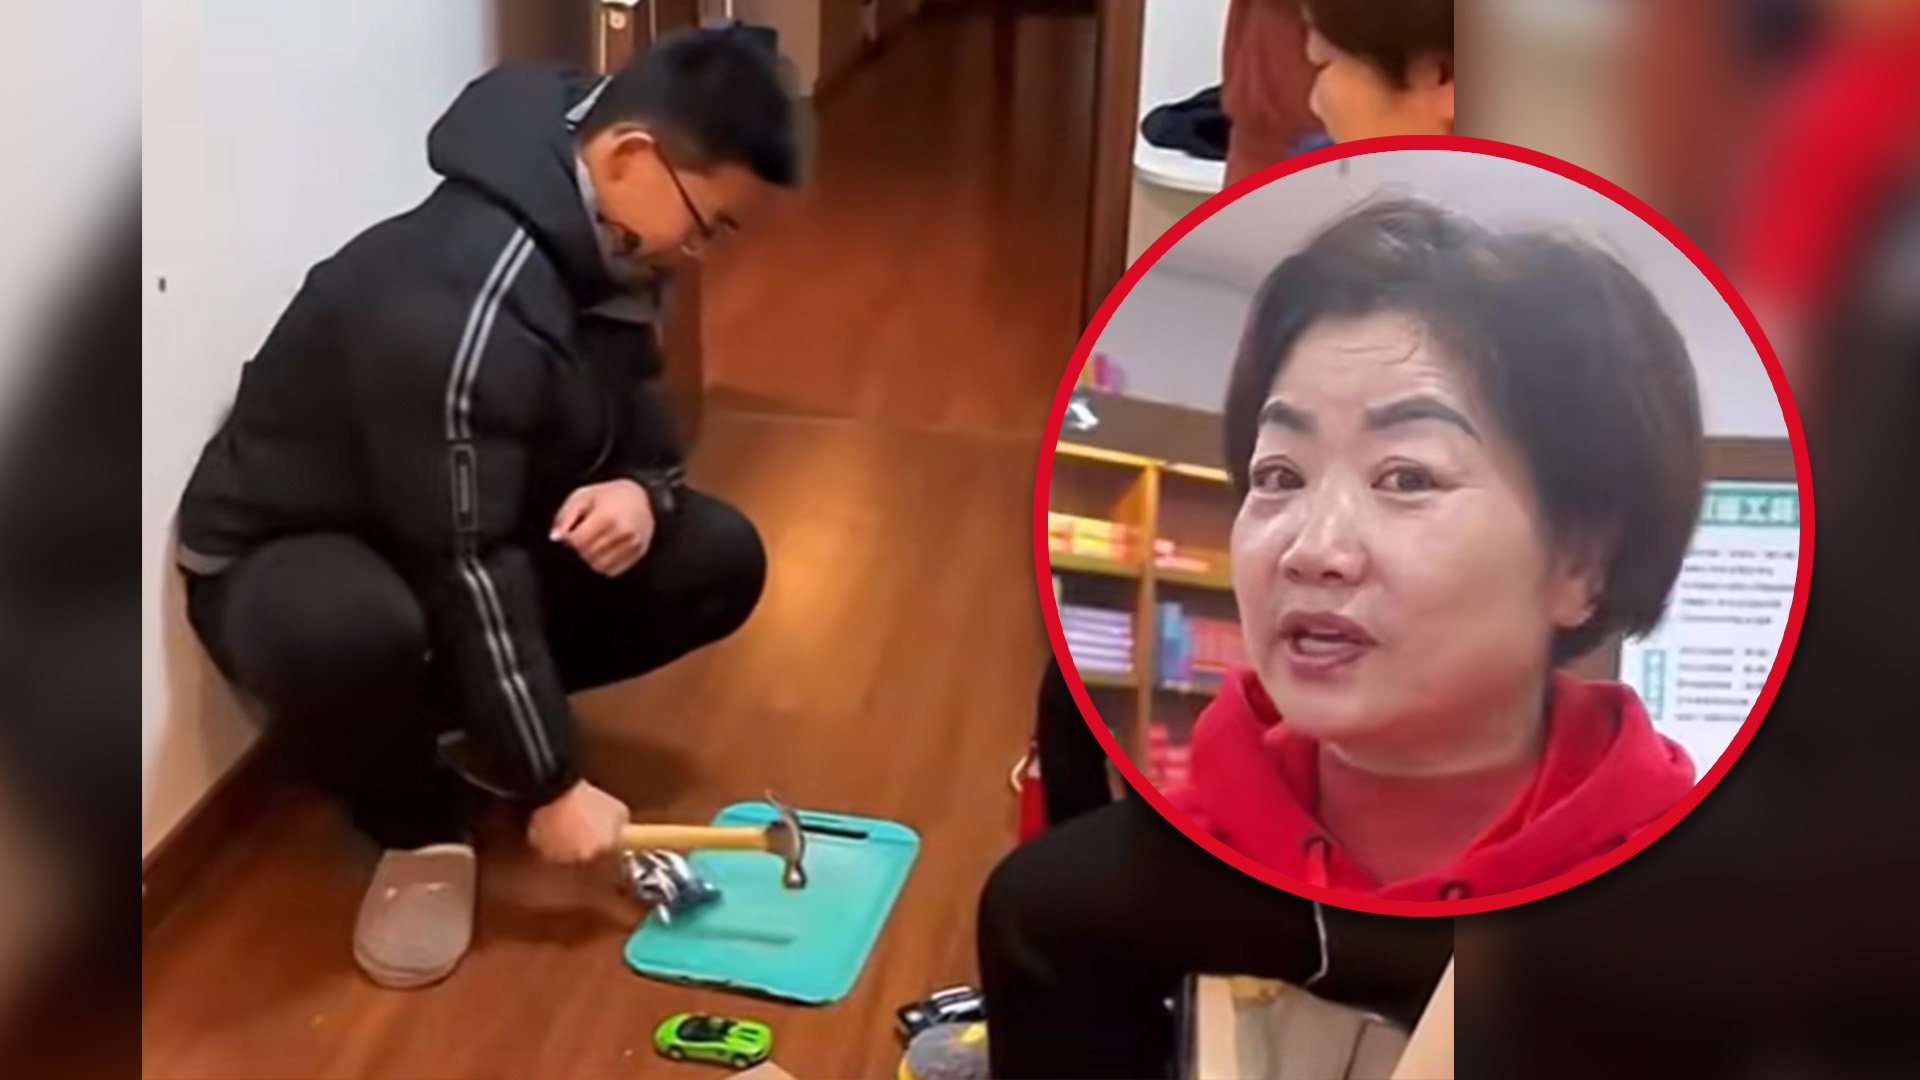 A self-styled education expert in China who uses physical punishment on her students has been slammed for being a bully. Photo: SCMP composite/Douyin